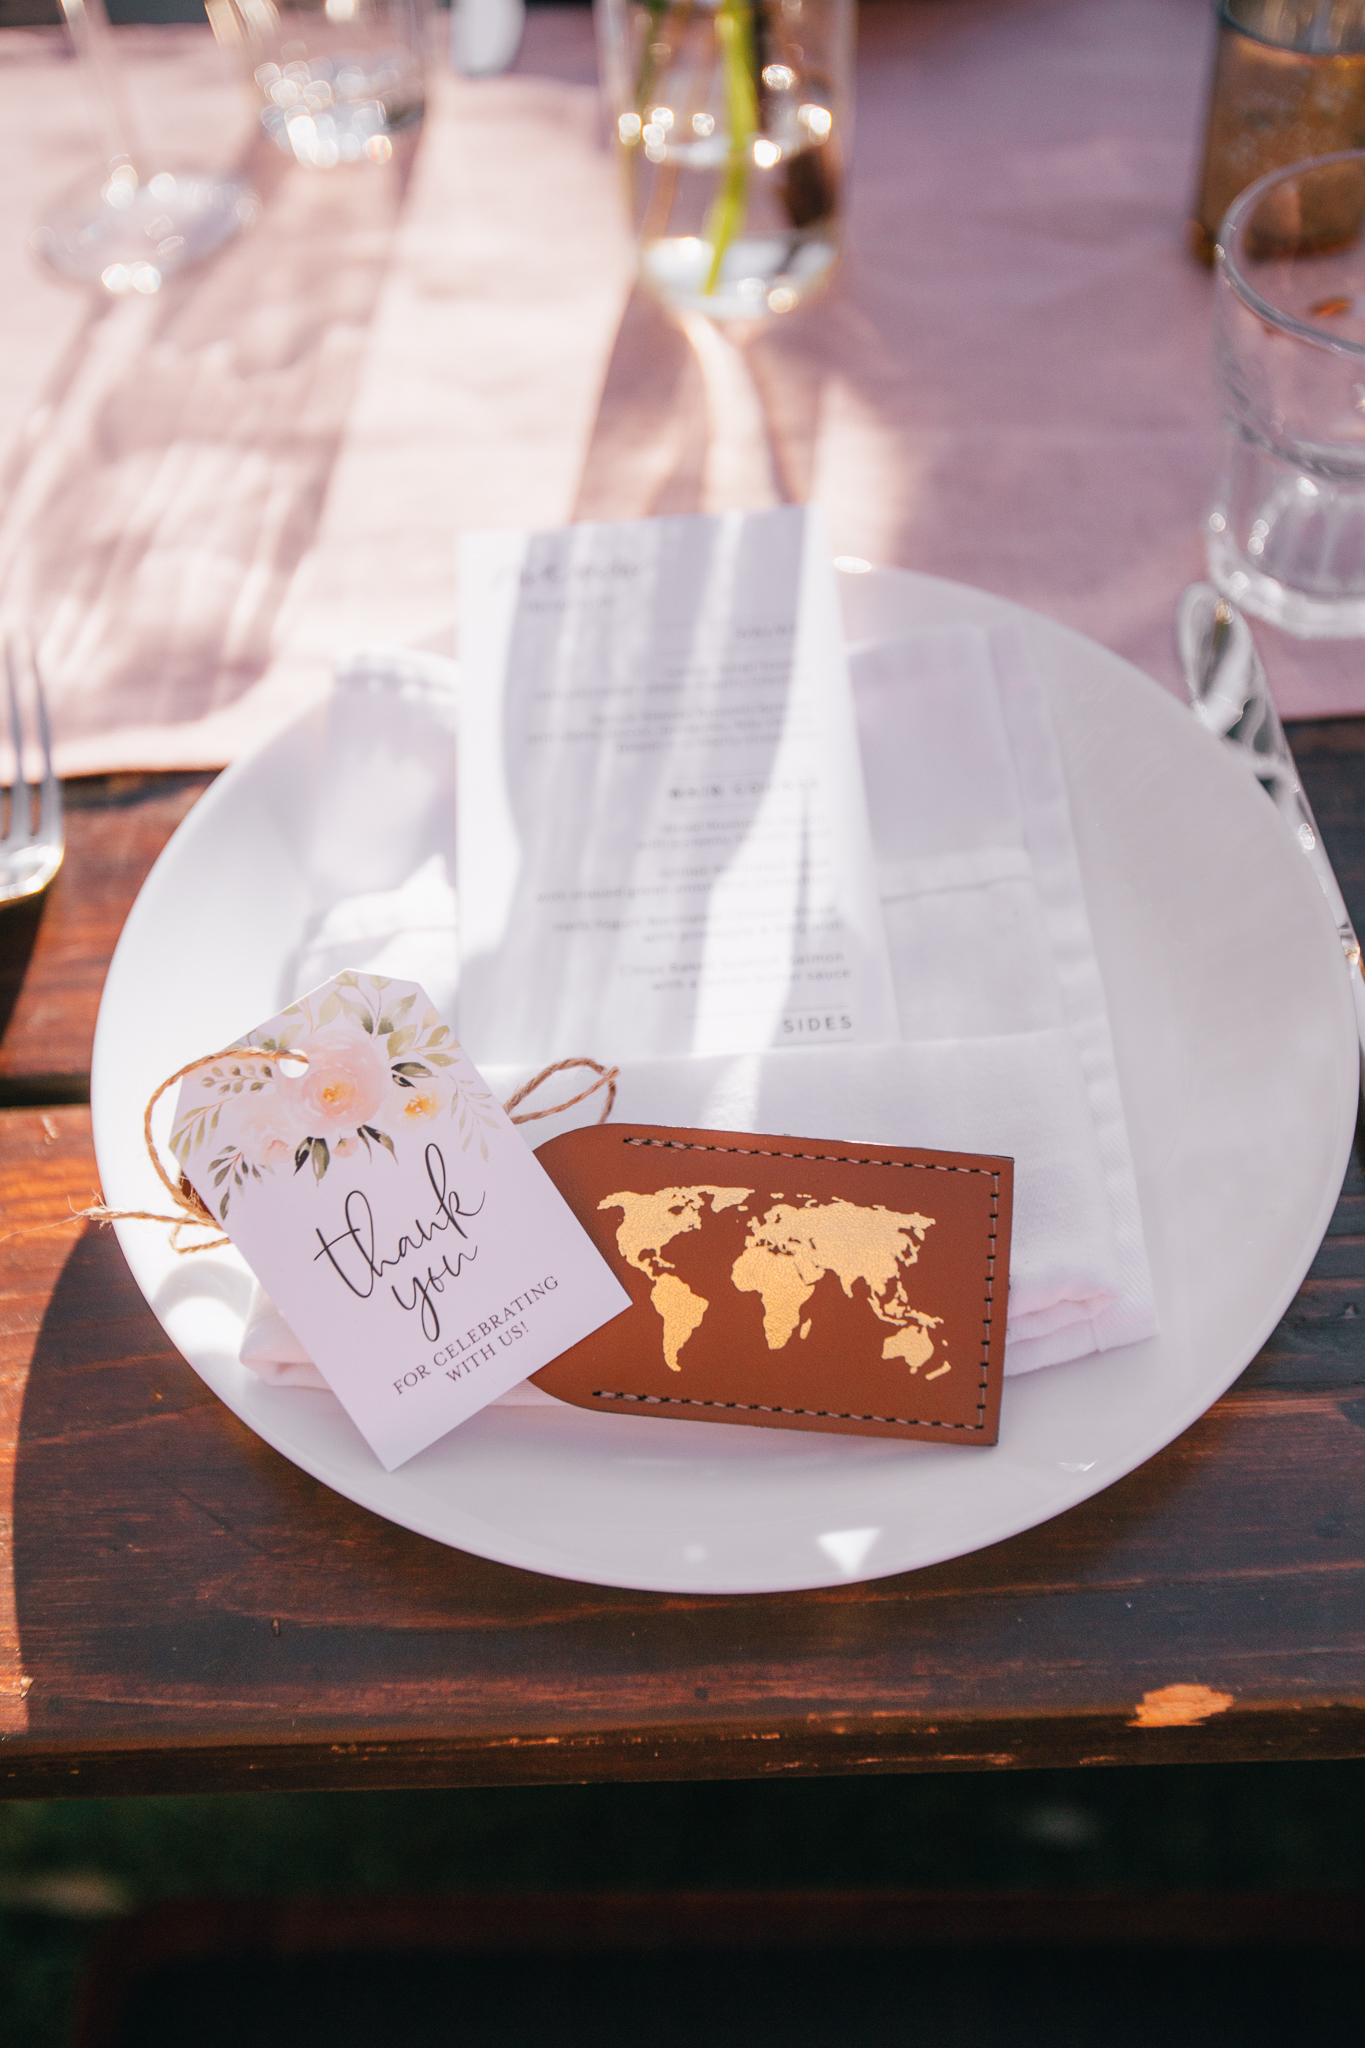 luggage tag on top of wedding reception menu for guest favor